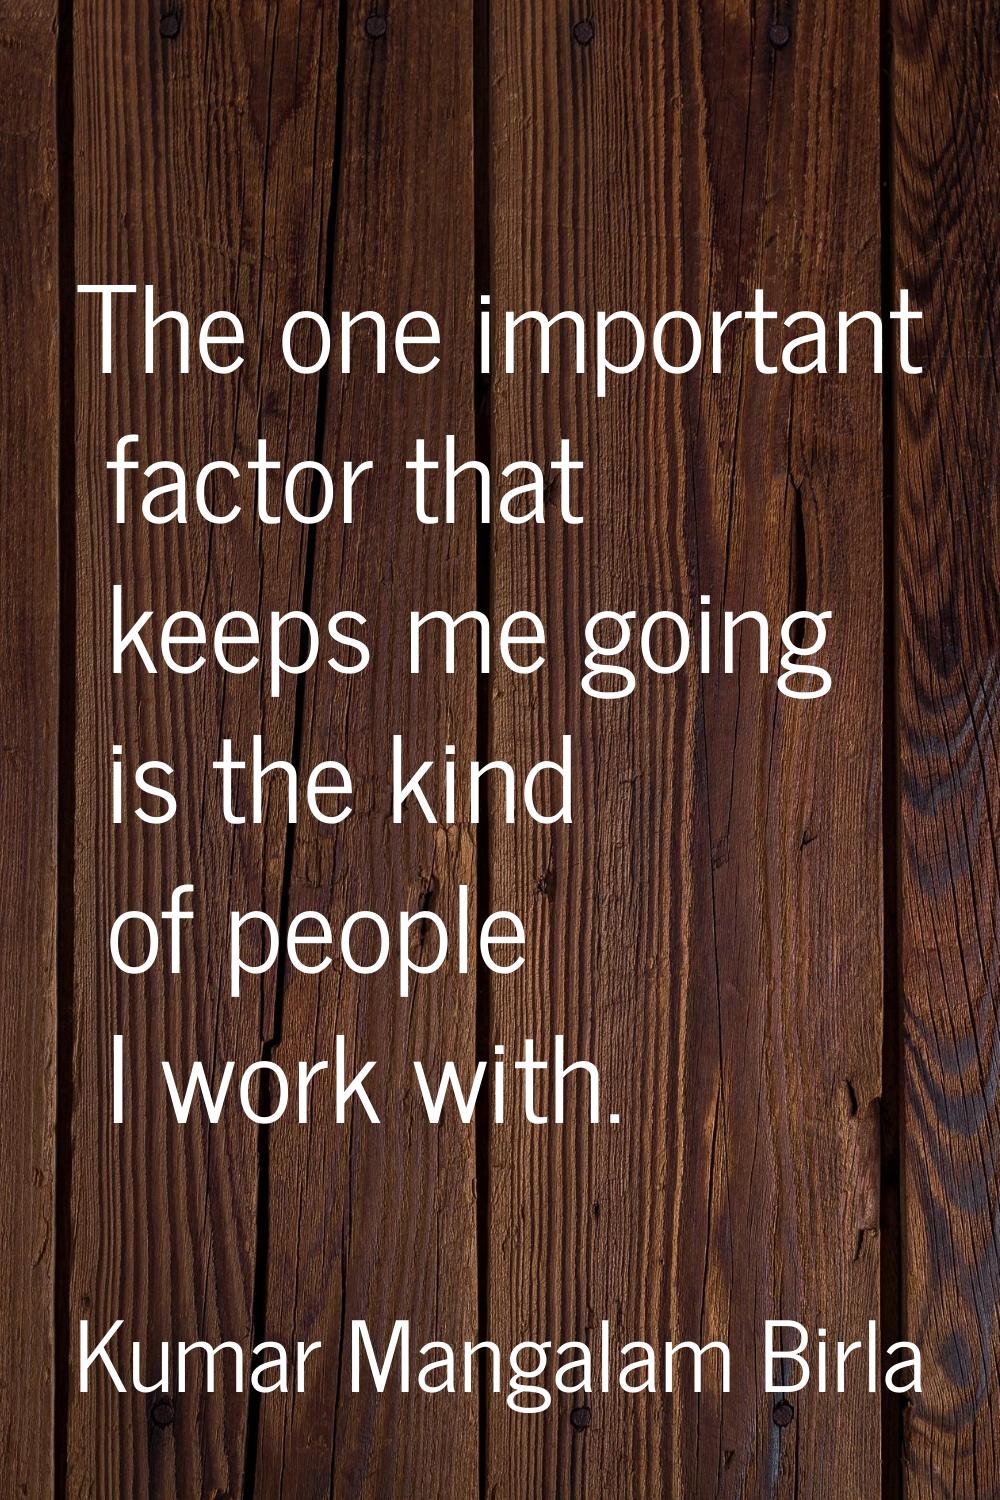 The one important factor that keeps me going is the kind of people I work with.